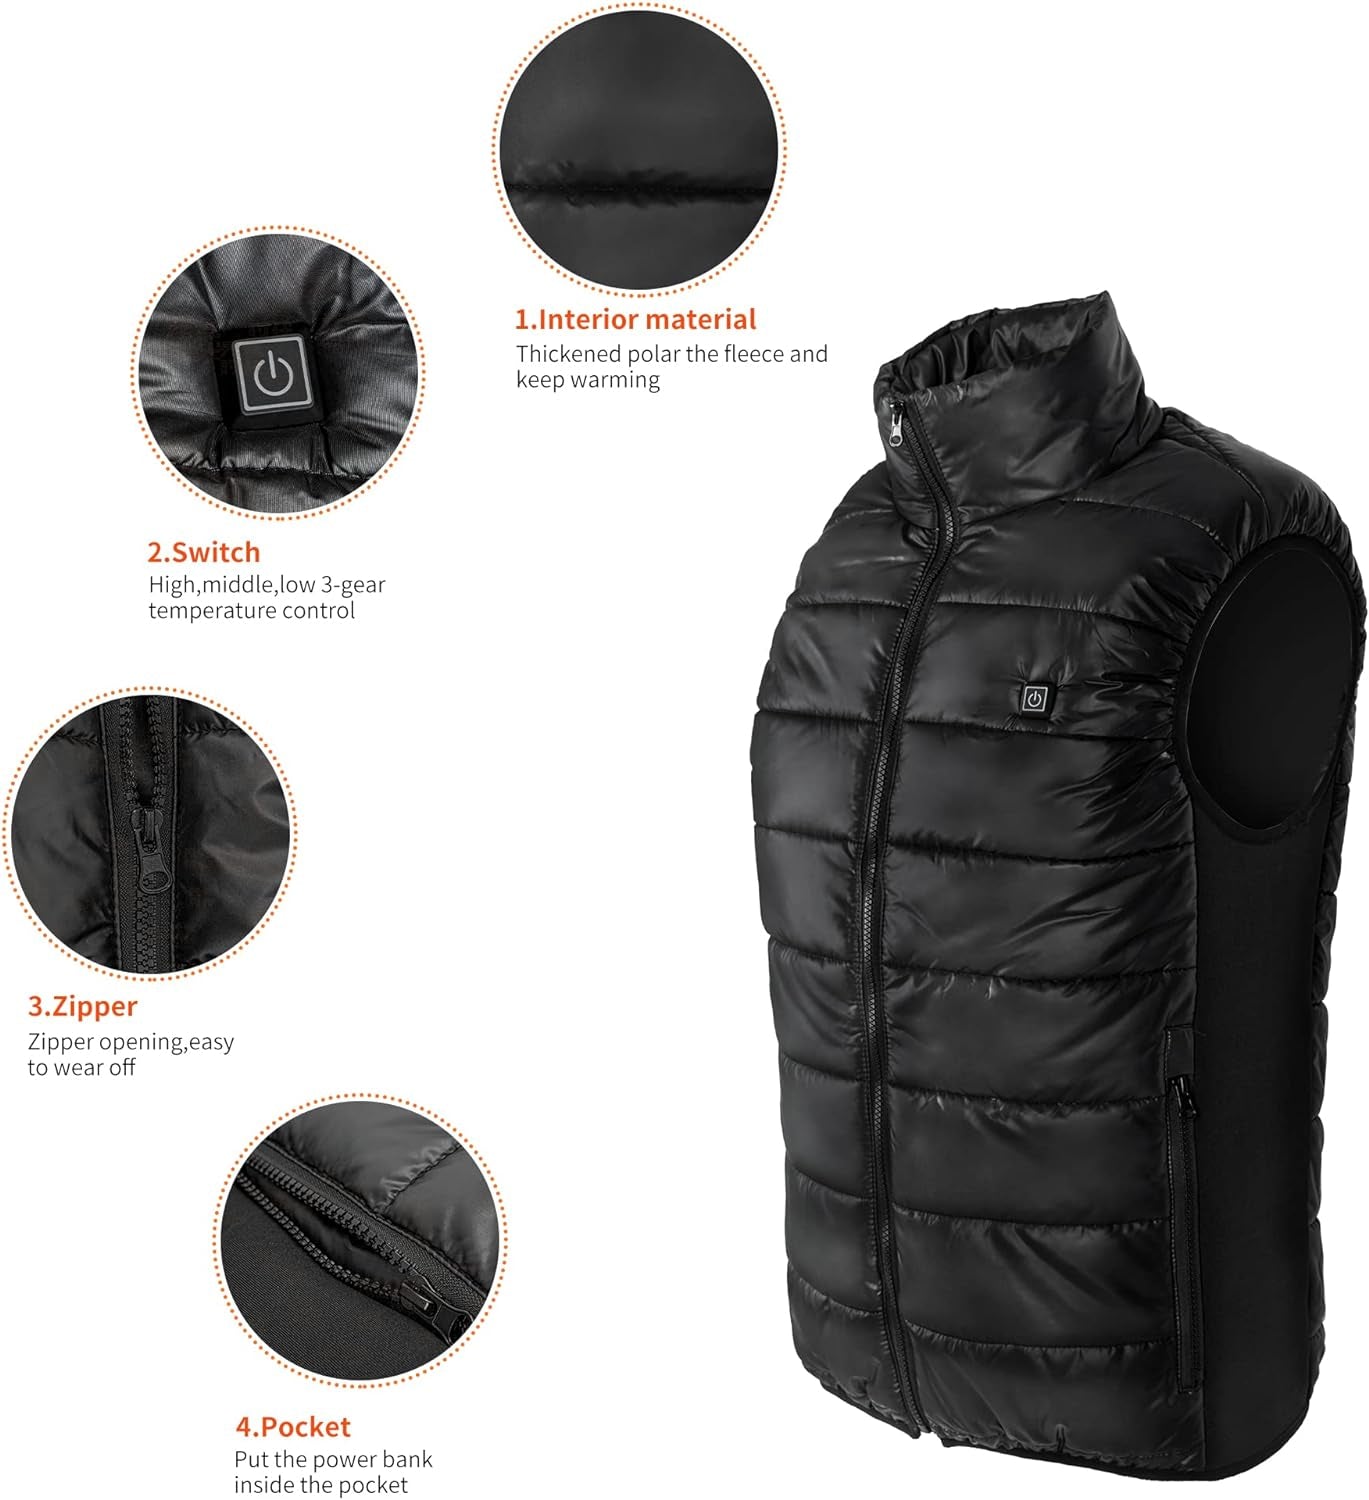 Heated Vest for Men TOSOHMK Warmer Heated Jacket Lightweight Black Electric Warming Vest for Snow Motorcycle Hunting Fishing